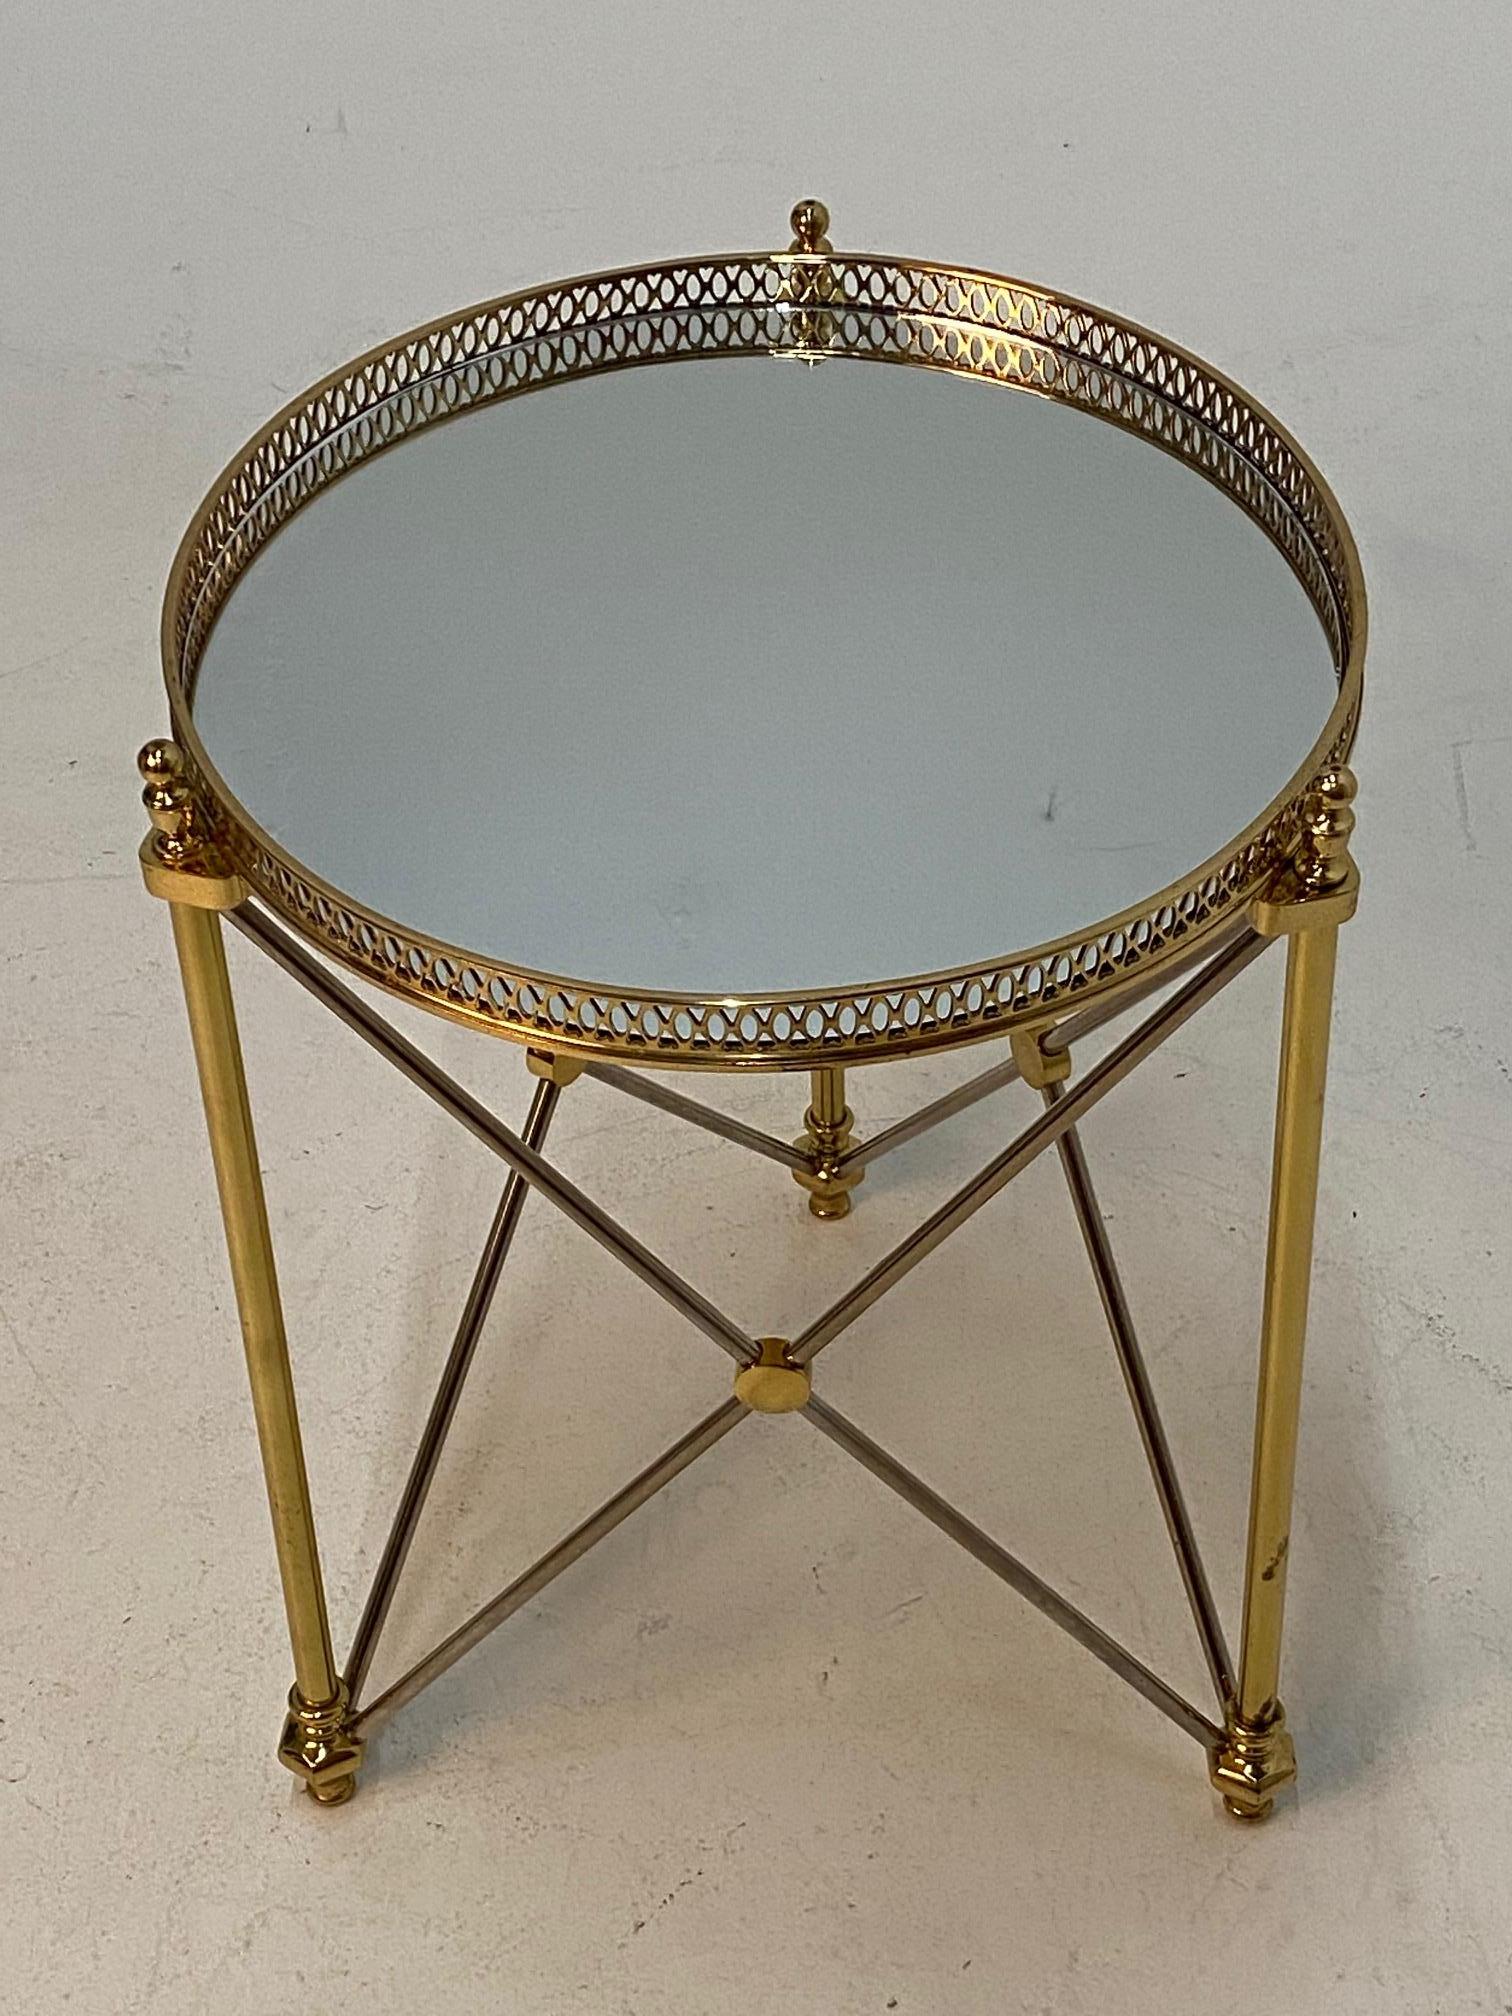 French Elegant Polished Steel & Brass Neoclassical Round Martini Table